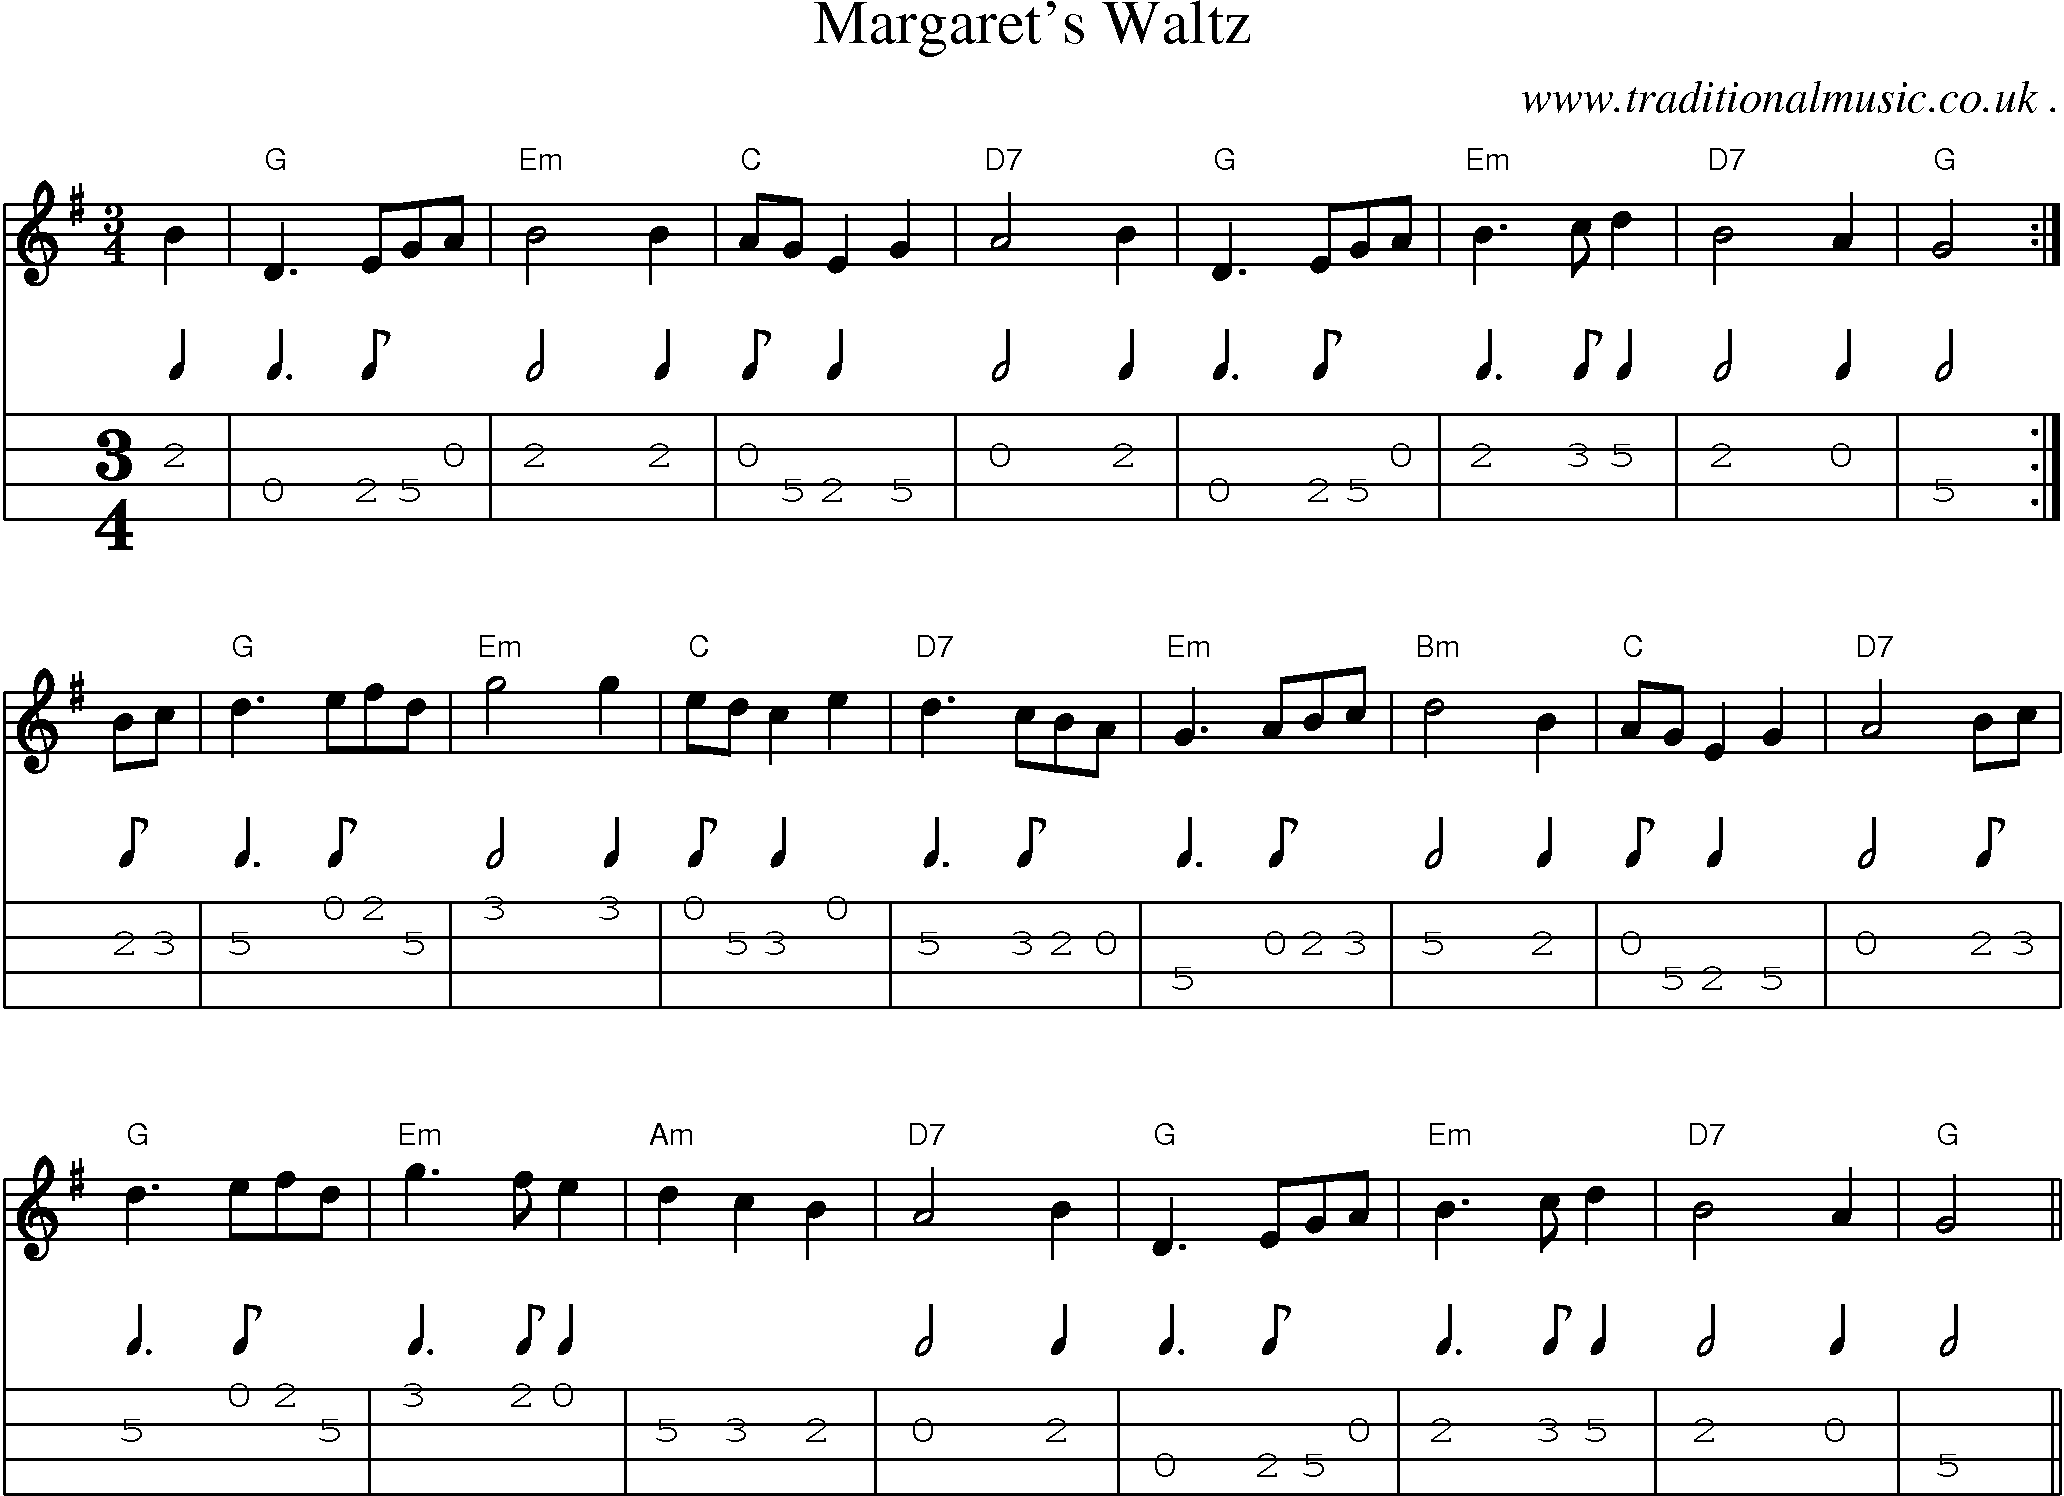 Music Score and Mandolin Tabs for Margarets Waltz